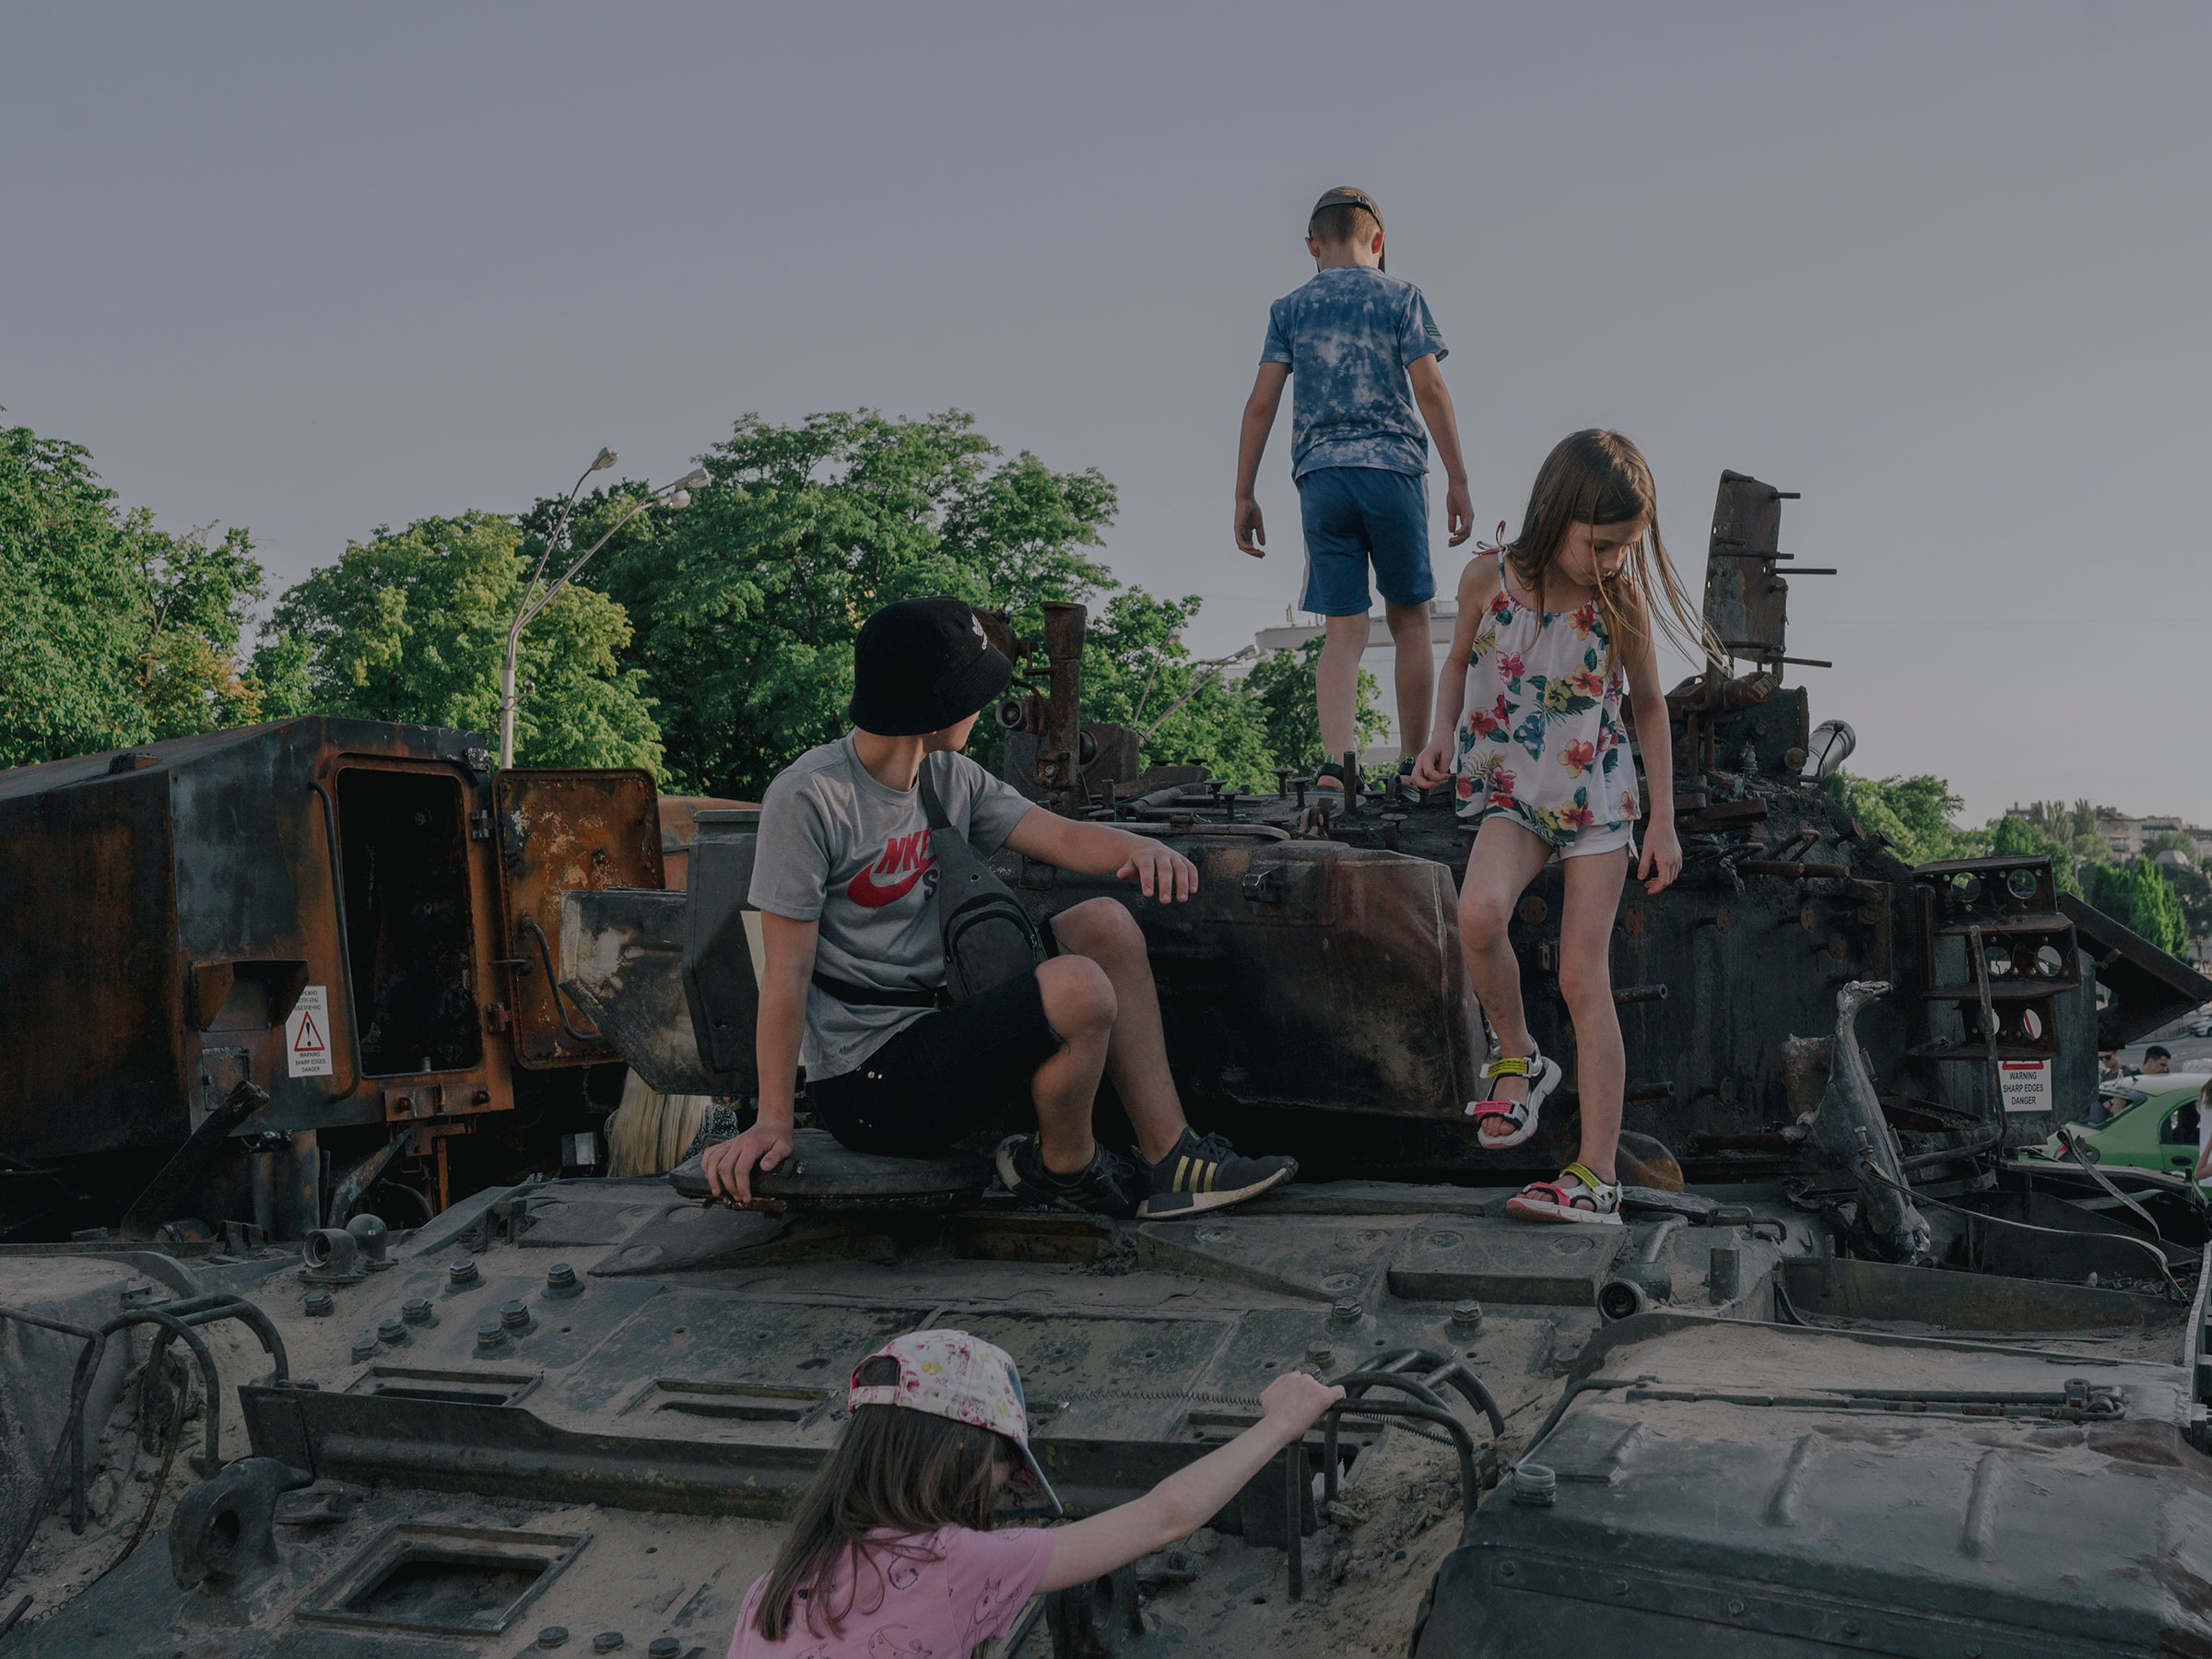 Children play on destroyed Russian war equipment in front of St. Michael‘s Monastery in Kyiv on June 12, 2022. (Fabian Ritter—DOCKS Collective)